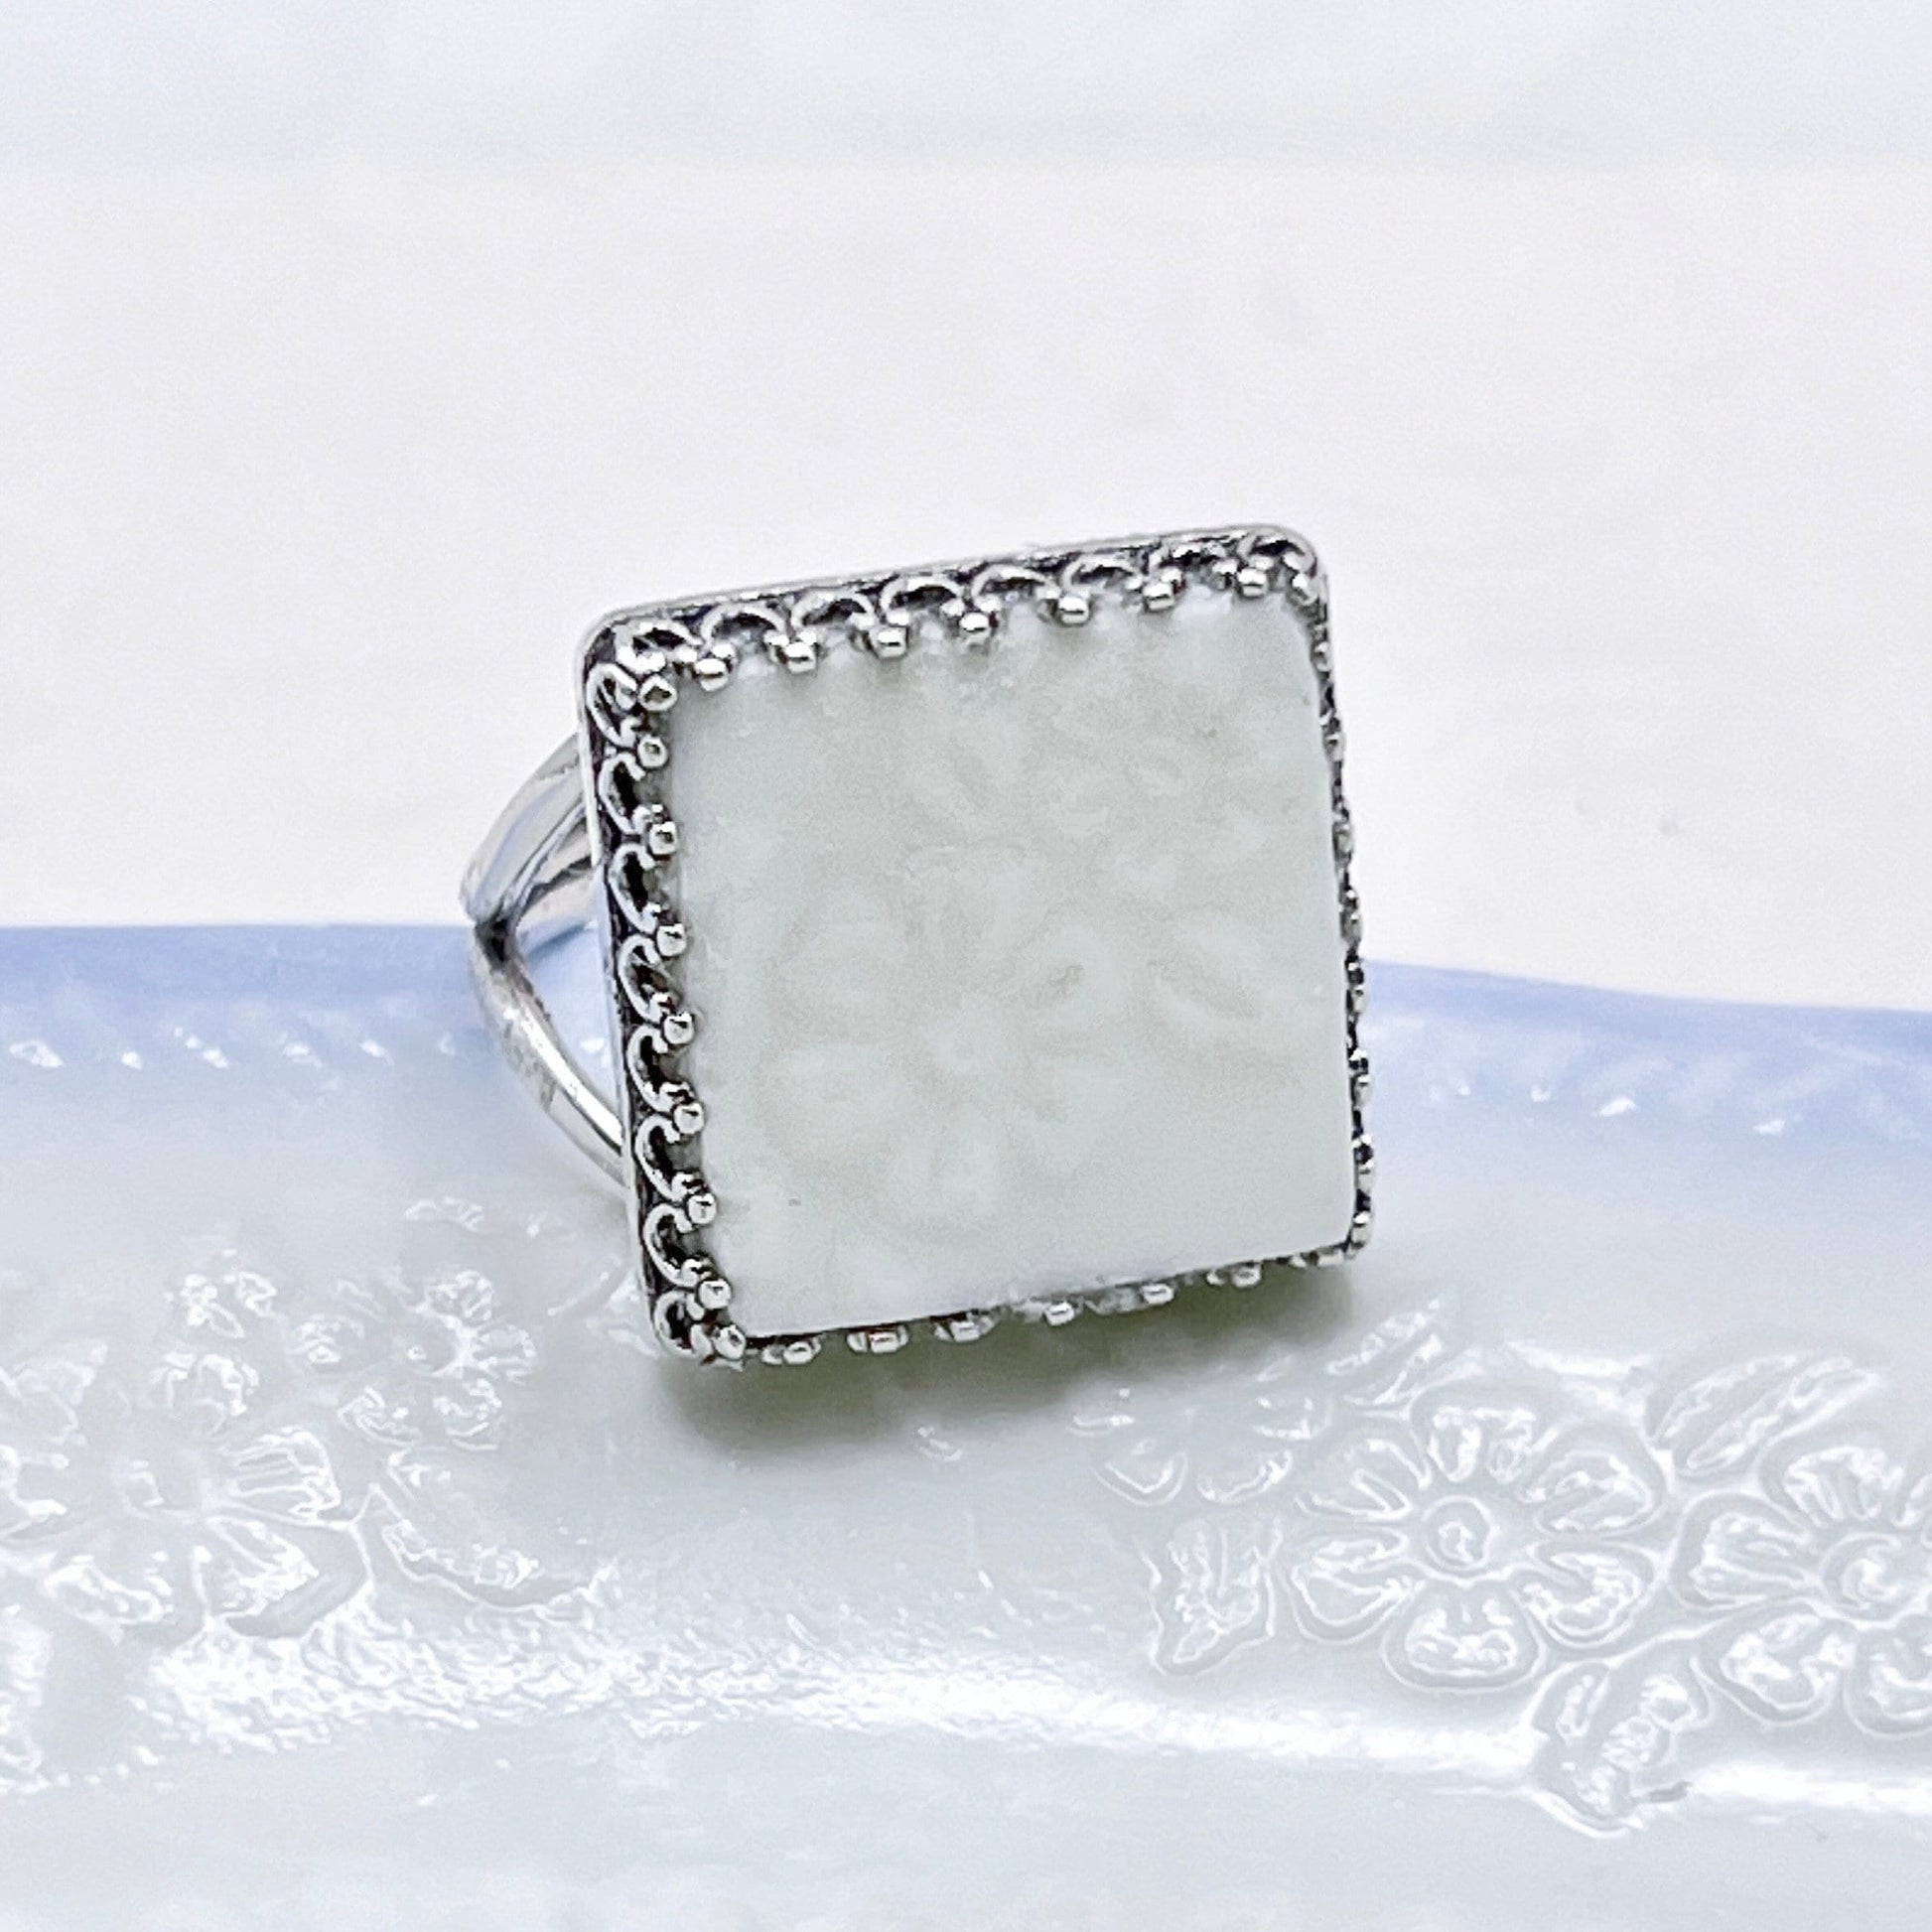 Depression Glass Jewelry, Vintage Fire King Alice, White Milk Glass, Sterling Silver, Adjustable Ring, Unique Gifts for Women